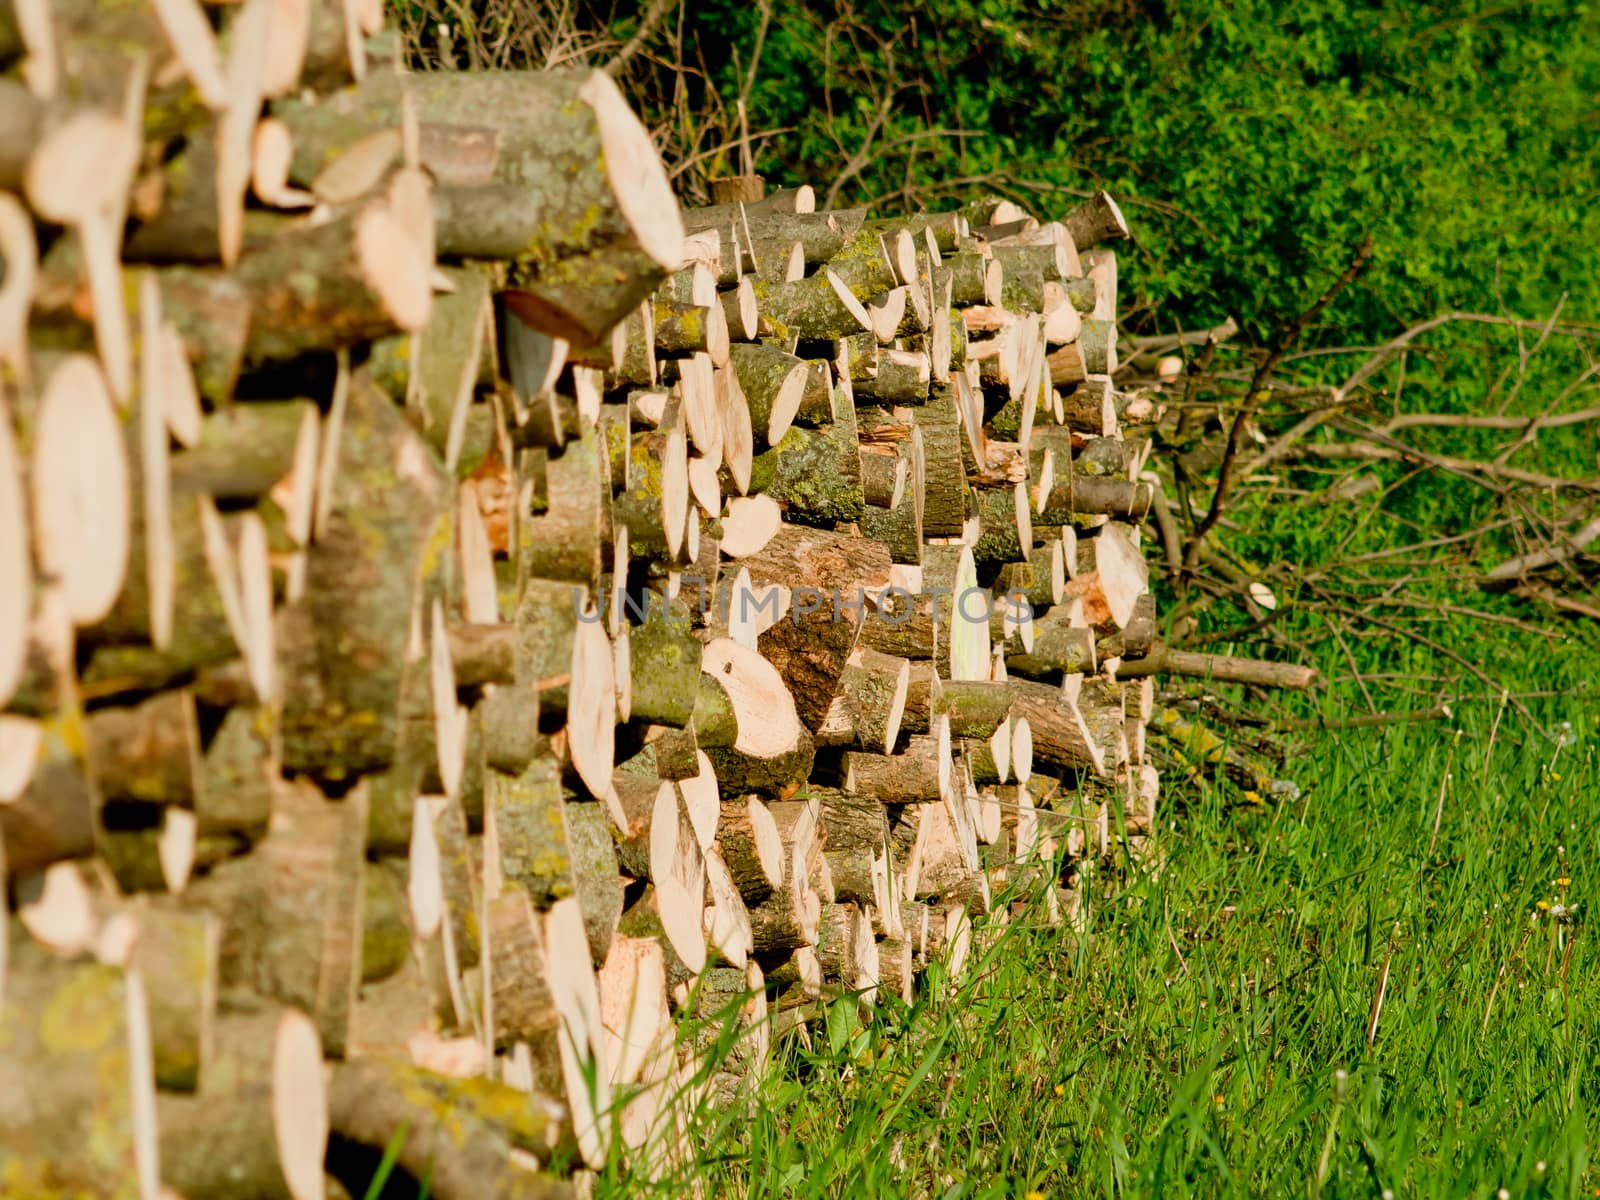 The cut wood pile in the woods.